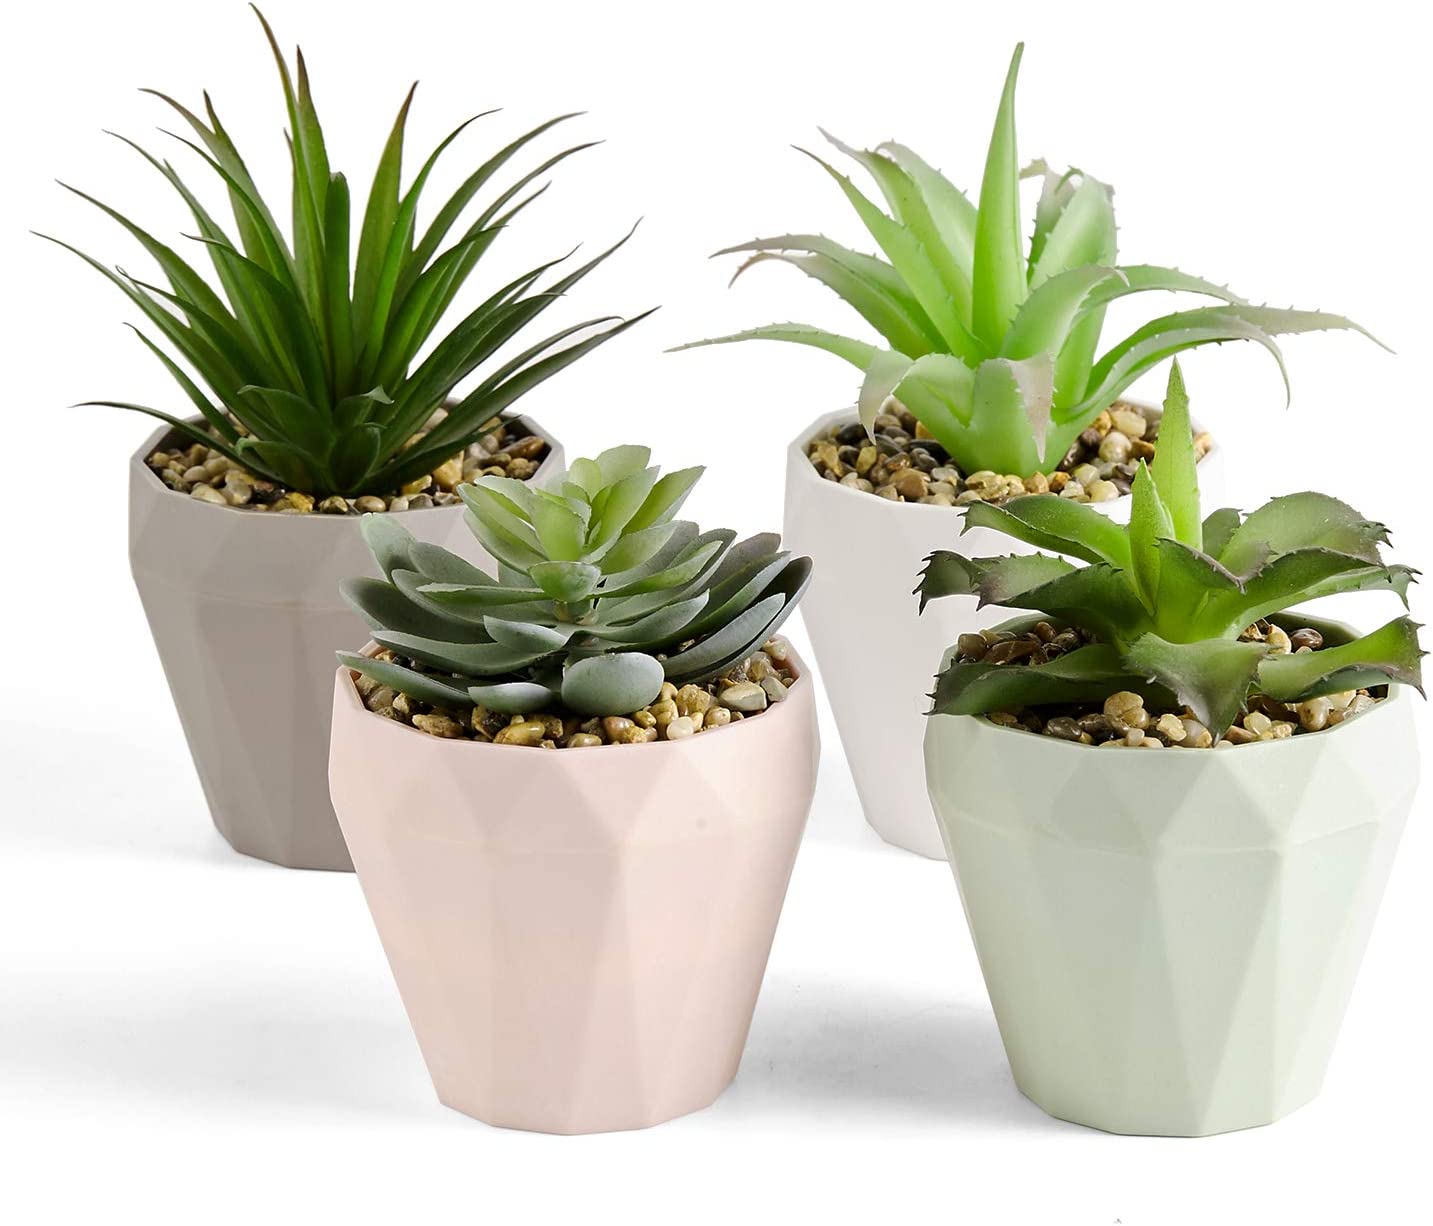 Primaison Green Artificial Plants DIY Decor Gift Set of 4 RRP 19.89 CLEARANCE XL 14.99